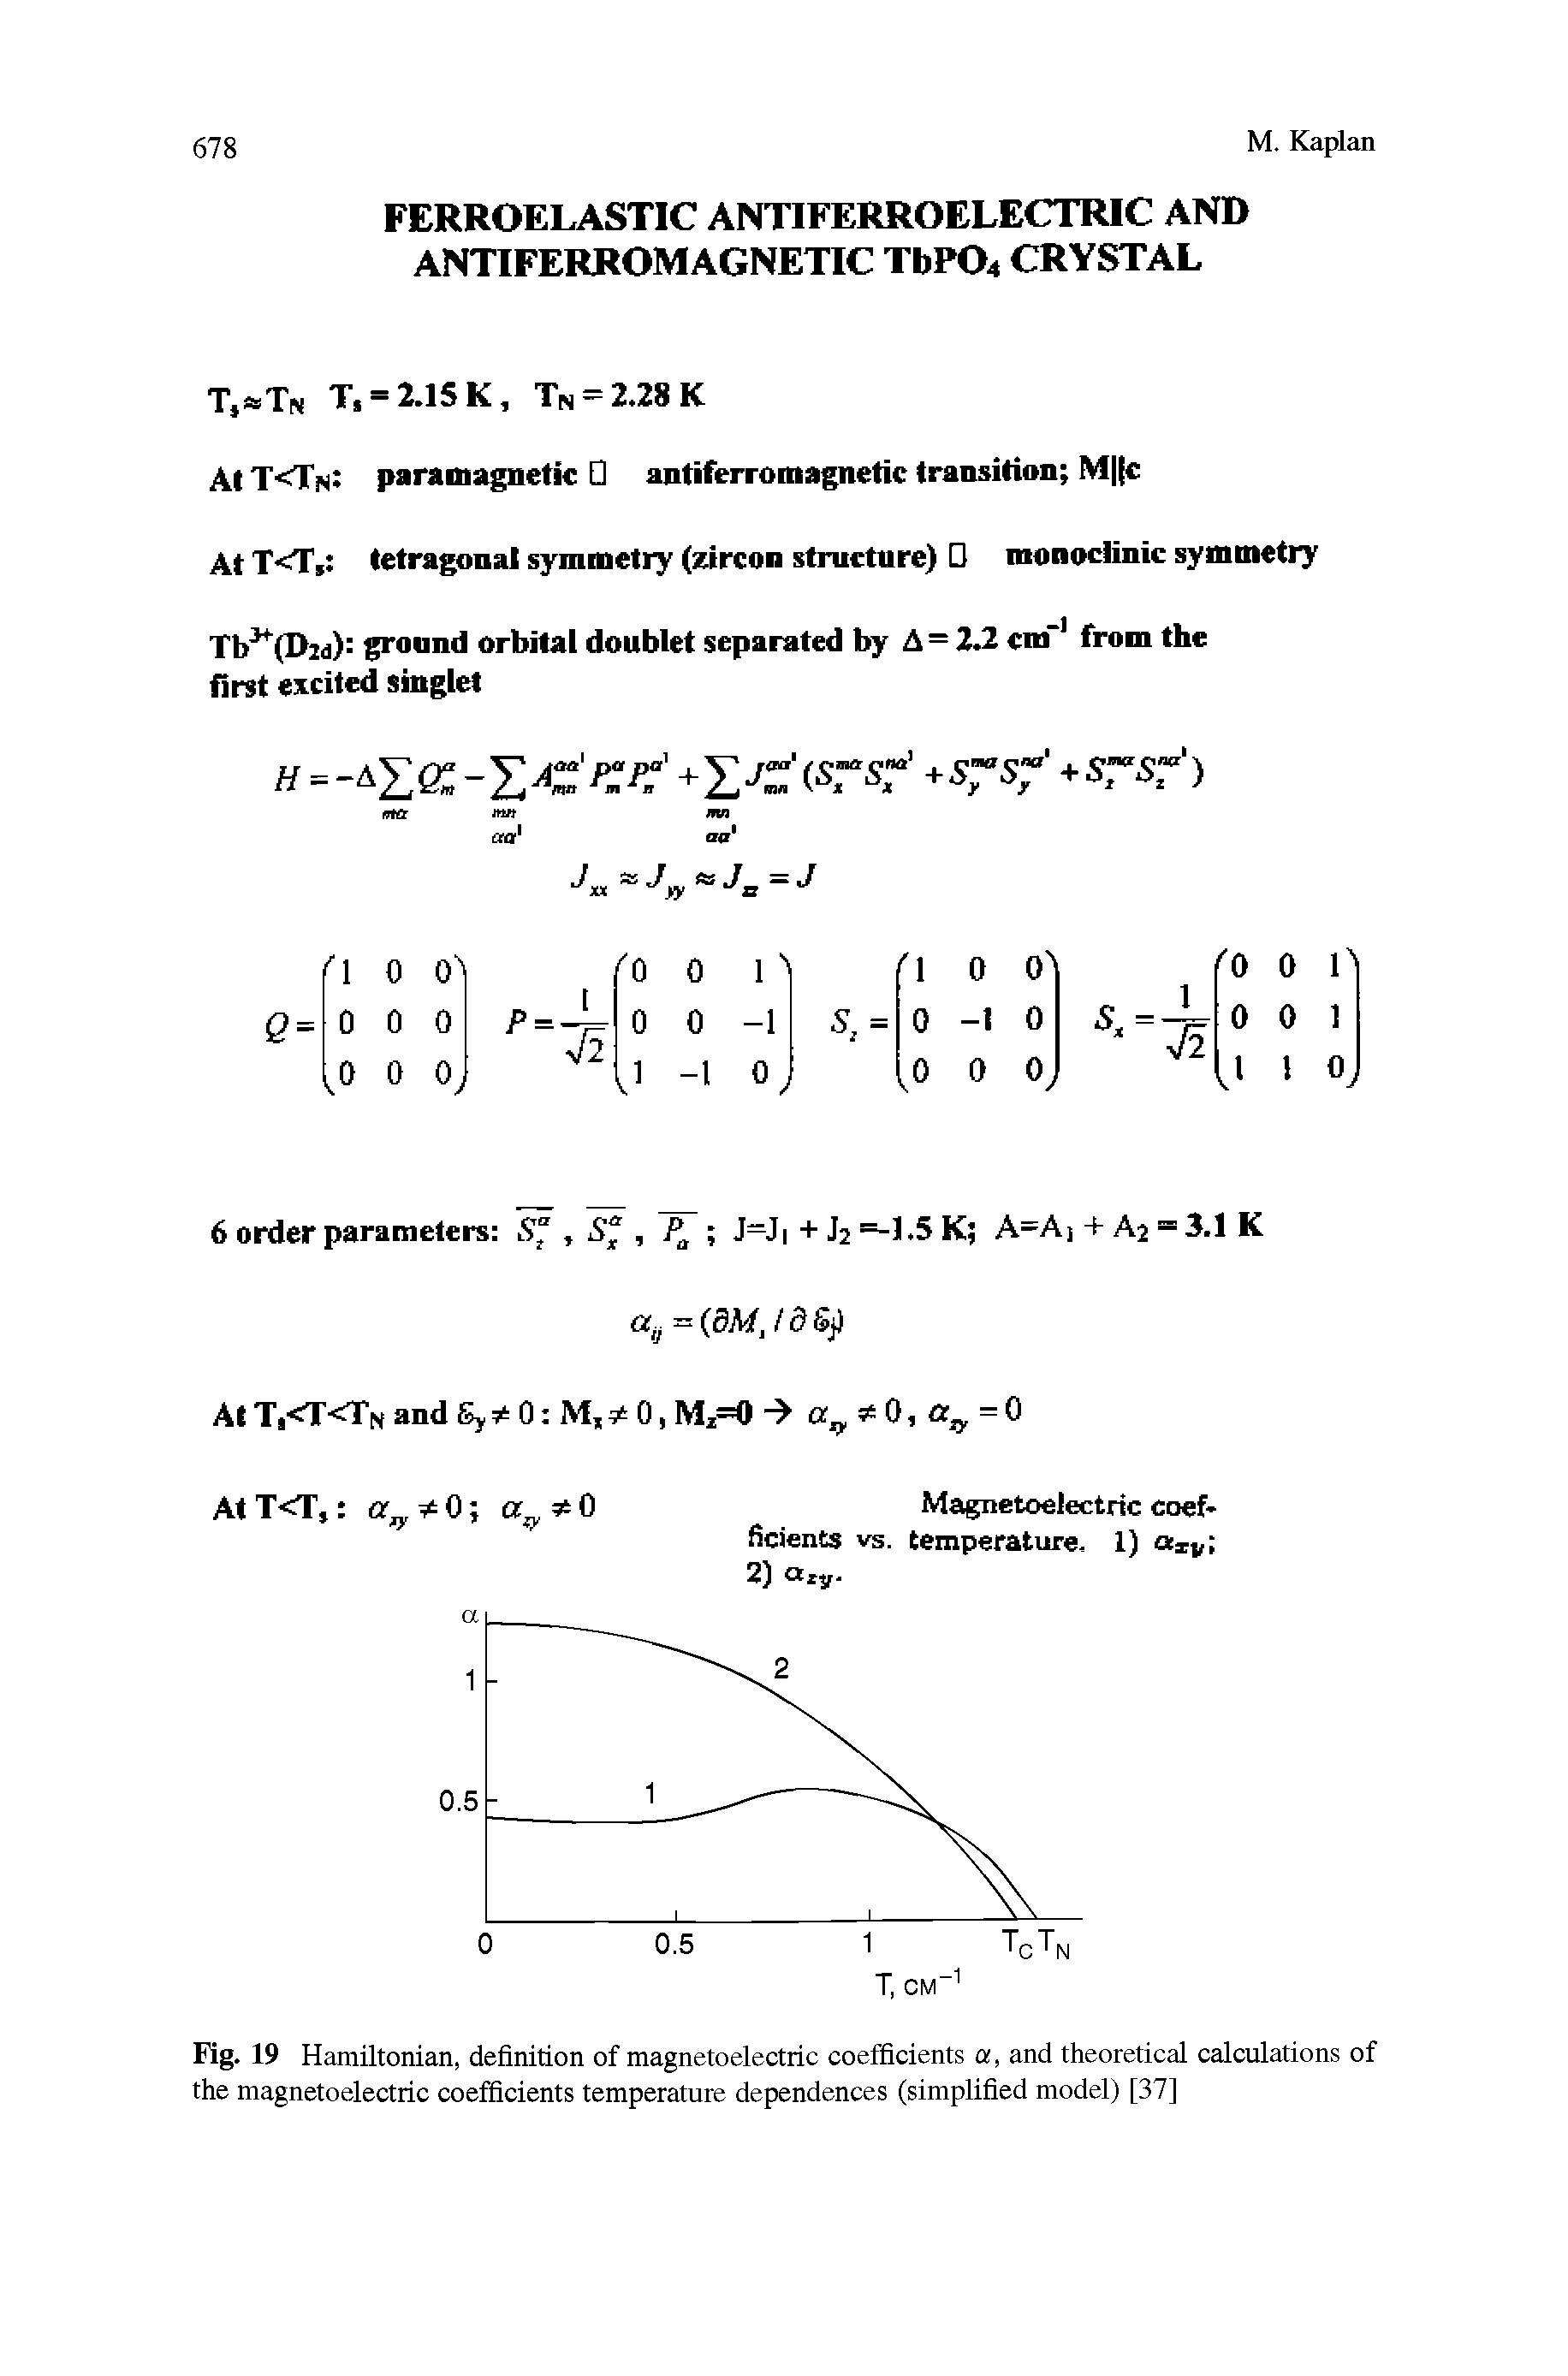 Fig. 19 Hamiltonian, definition of magnetoelectric coefficients a, and theoretical calculations of the magnetoelectric coefficients temperature dependences (simplified model) [37]...